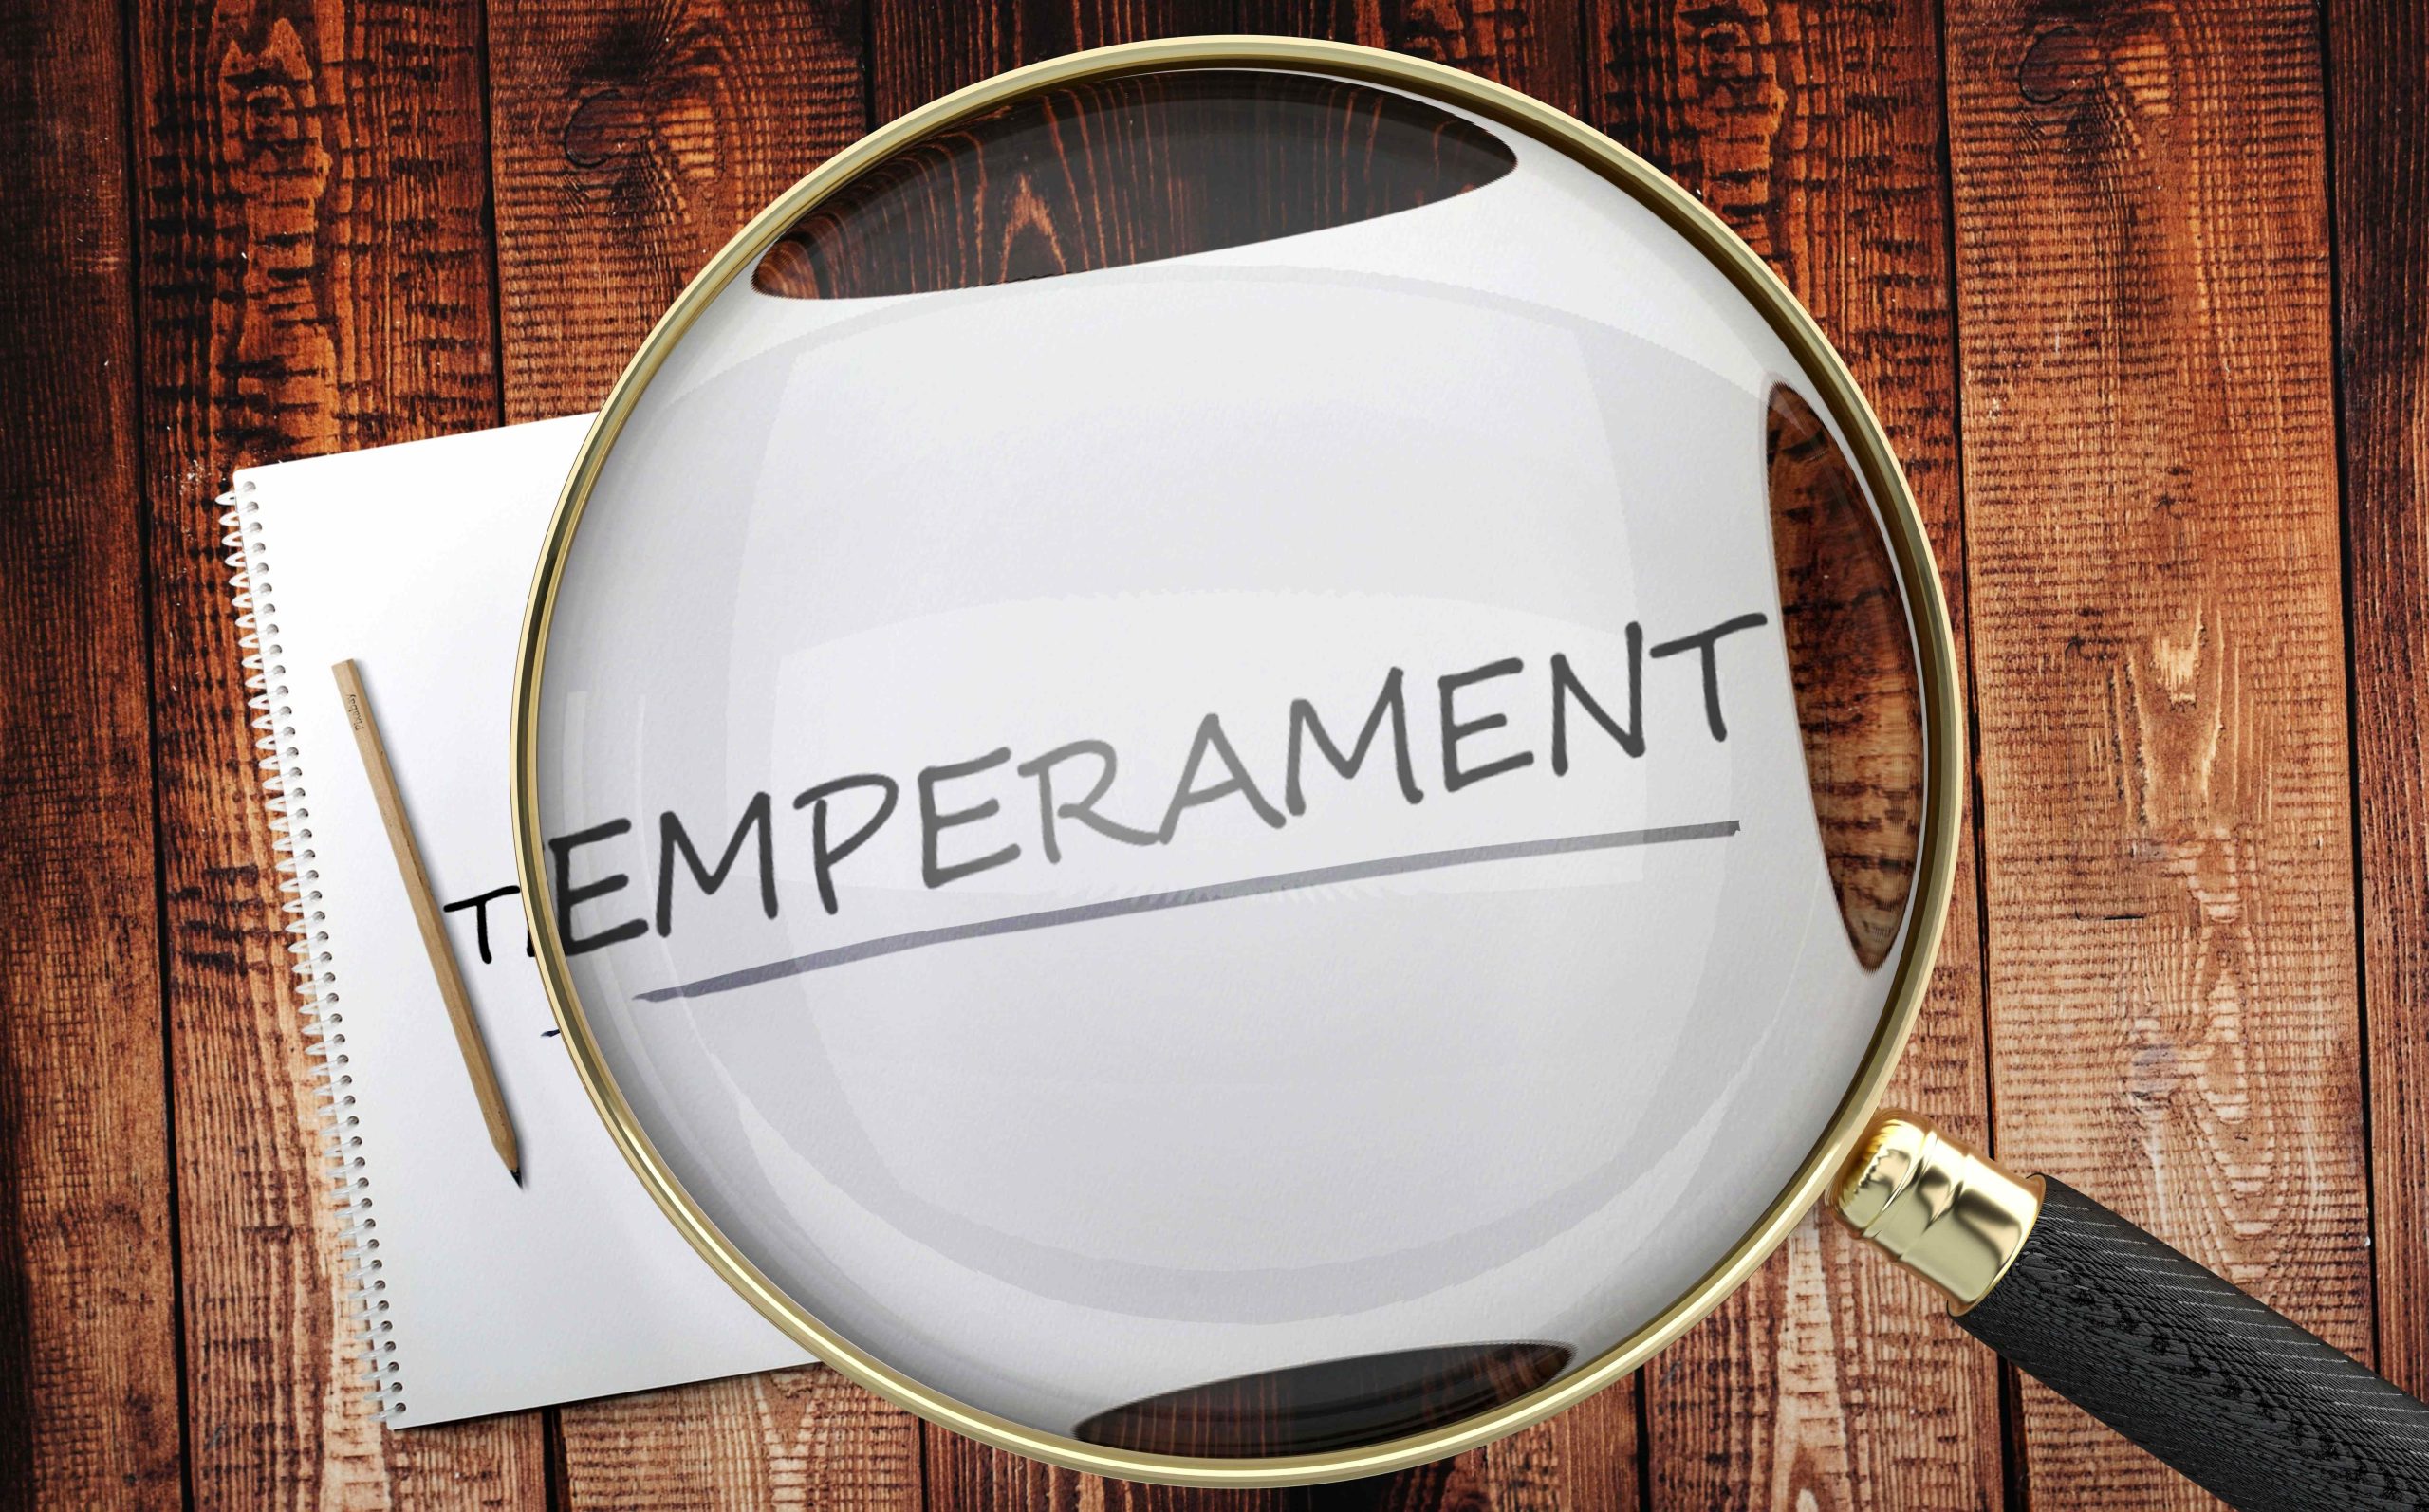 HOW TEMPERAMENT TYPE CAN INFLUENCE YOUR CAREER